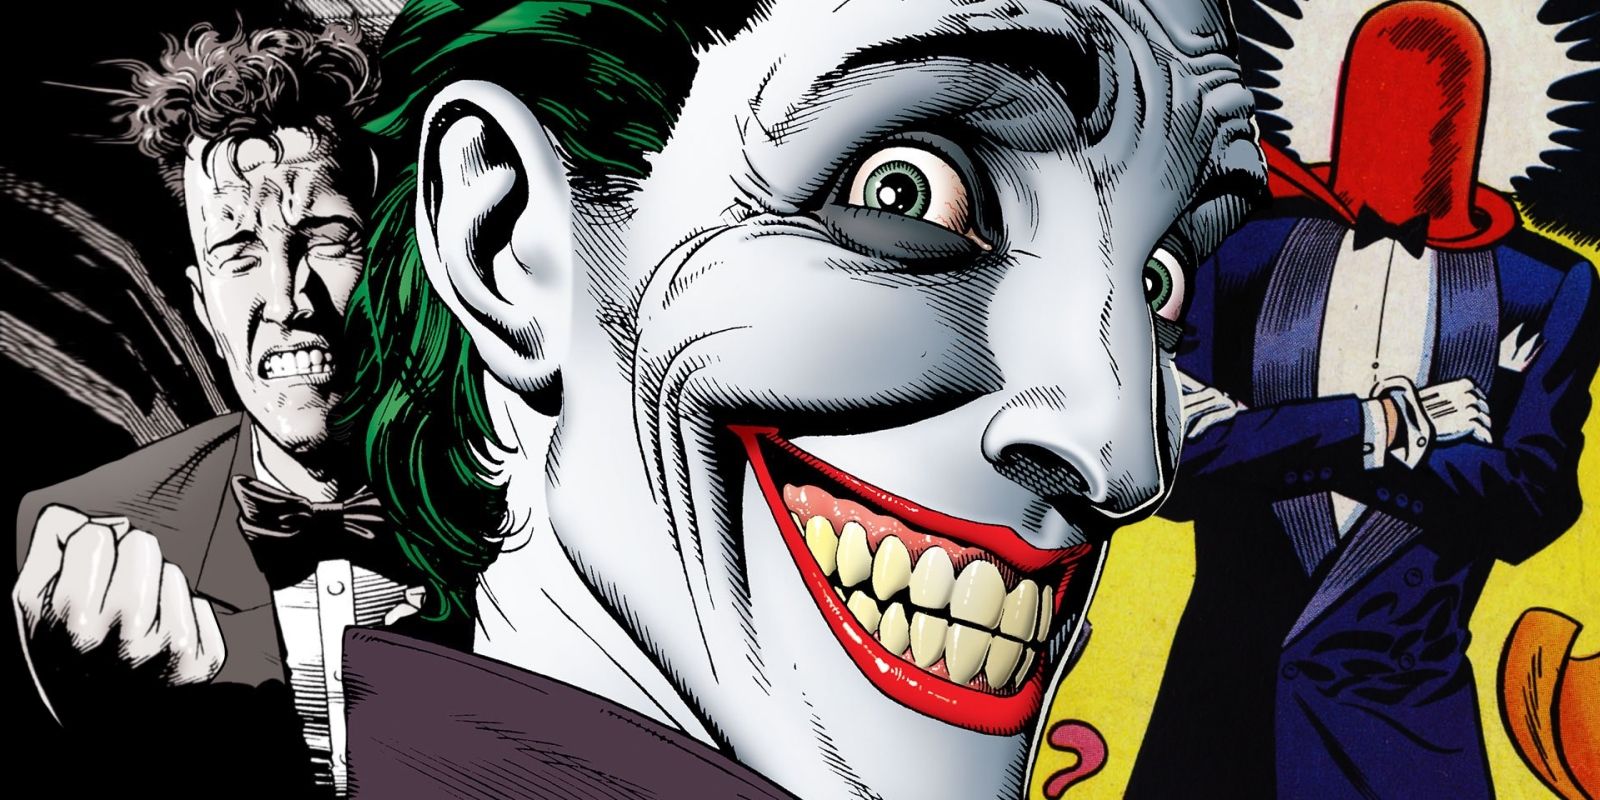 The Joker Confirms His “One Bad Day” Didn’t Make Him Evil